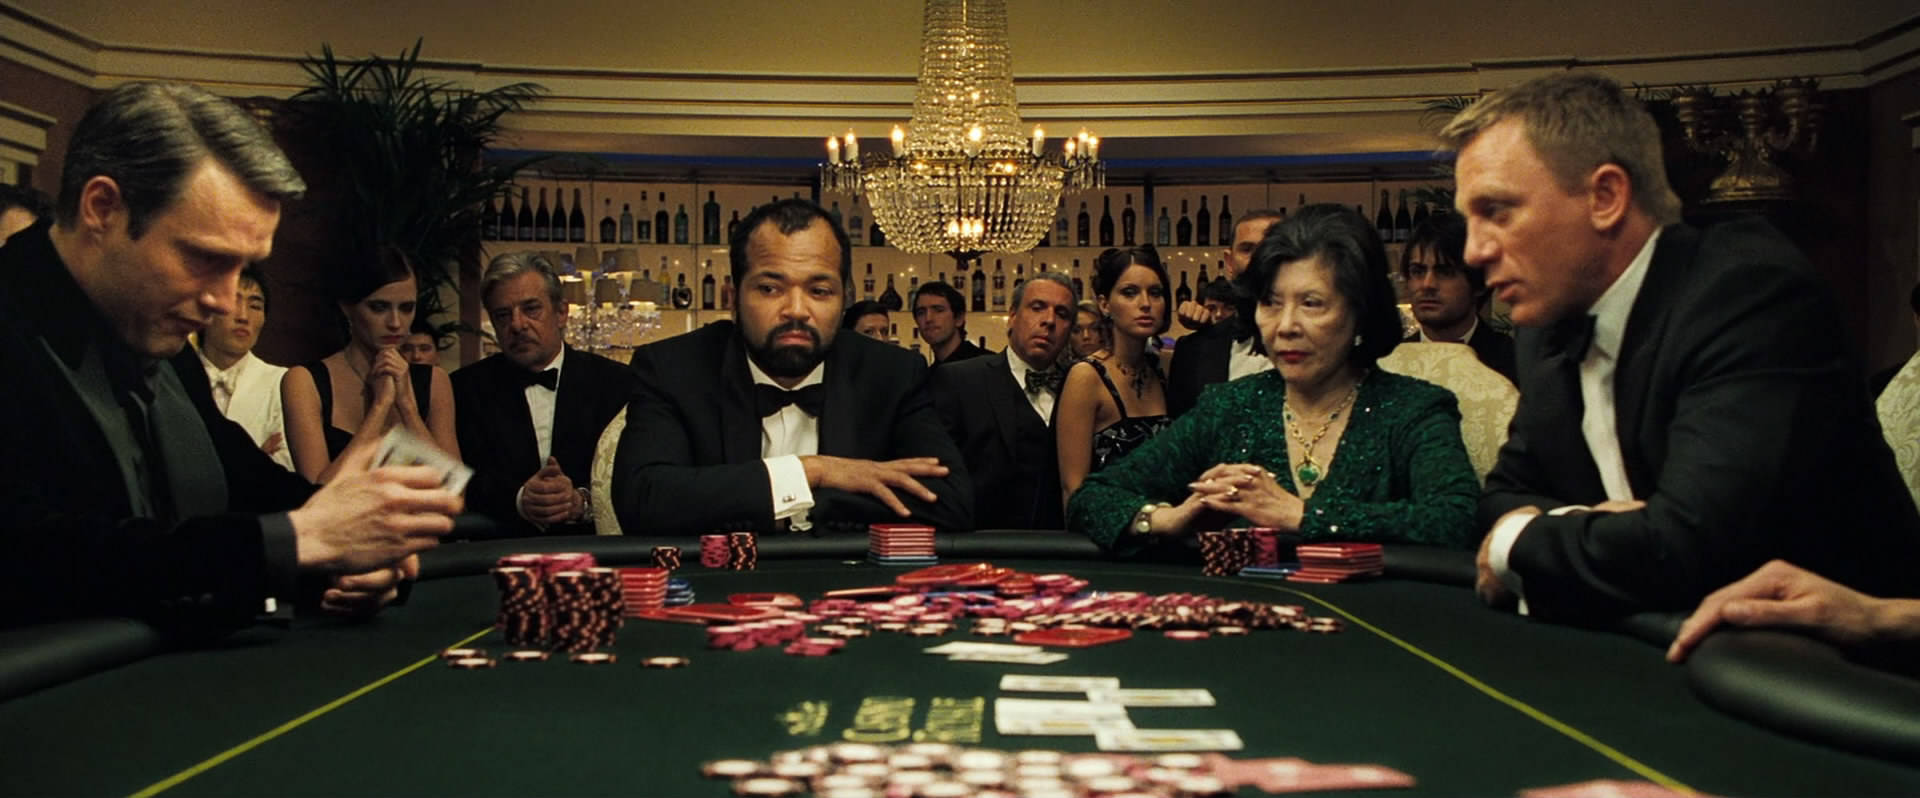 Rich People Playing On Poker Table Wallpaper